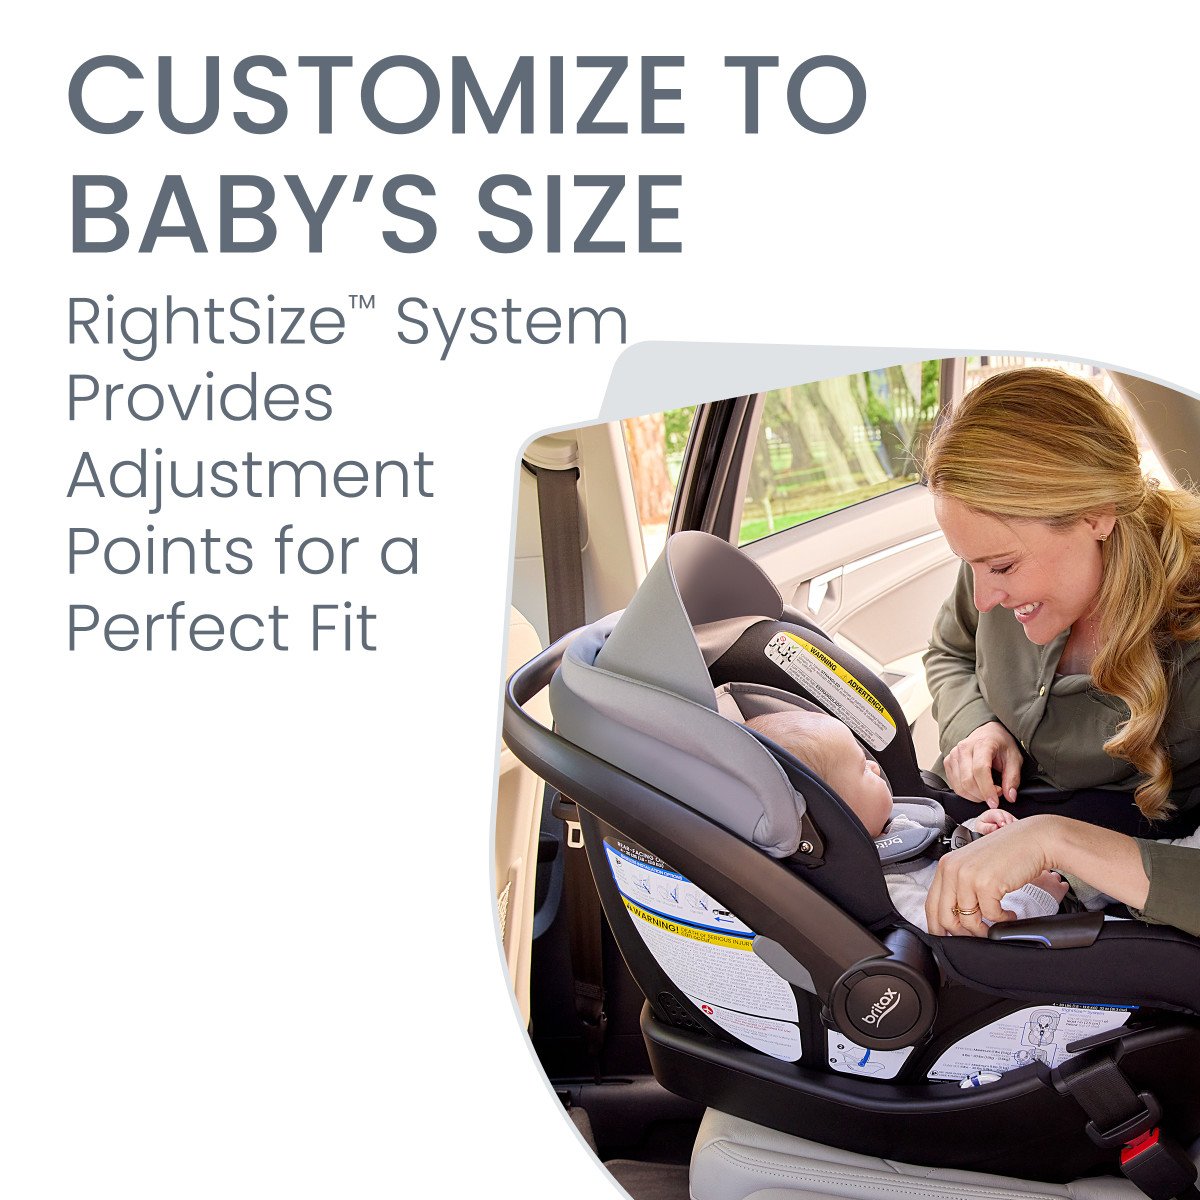 Customize to Baby's size with RightSize System (Copy)